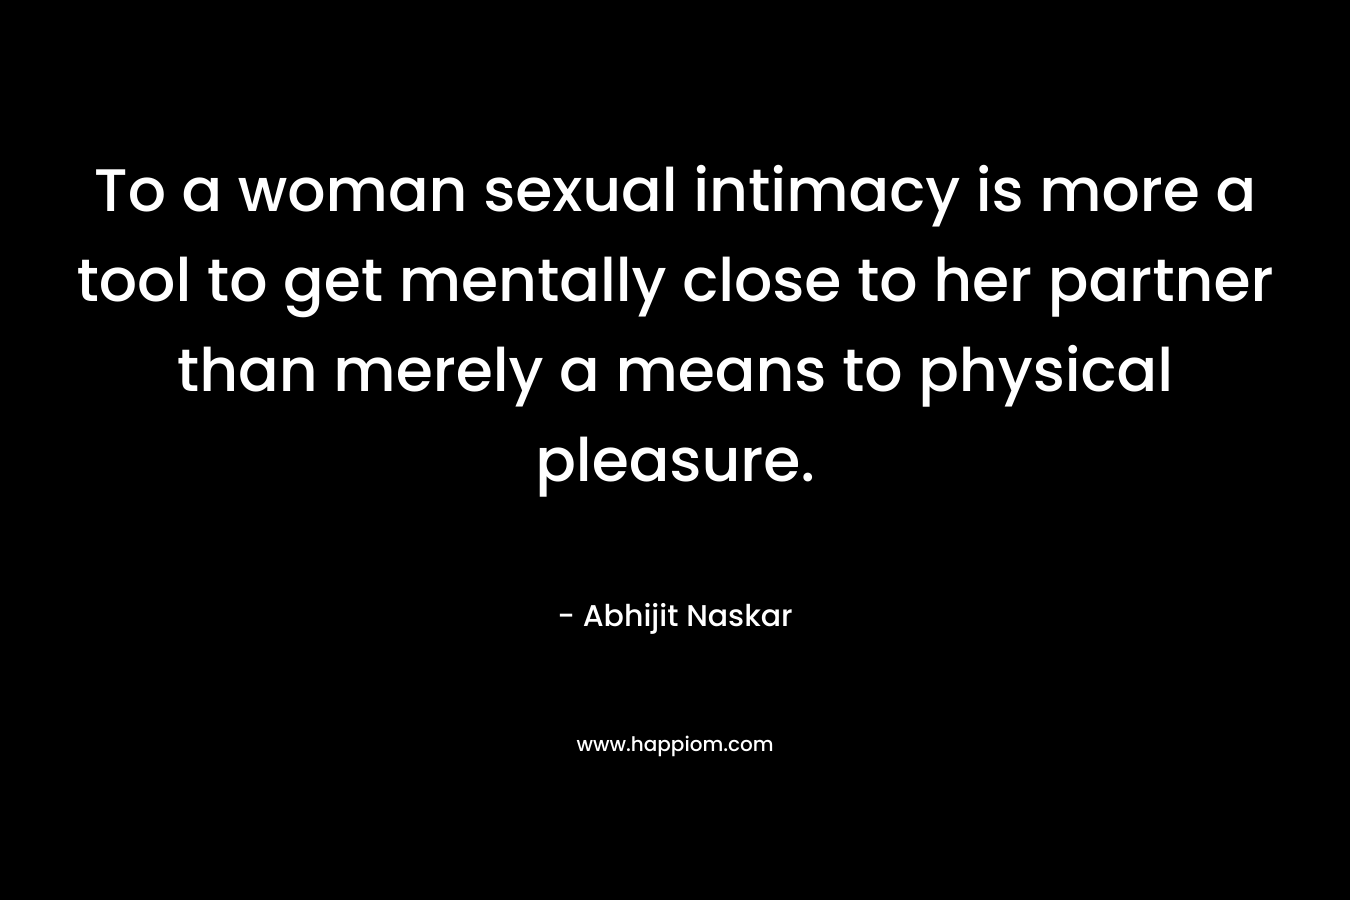 To a woman sexual intimacy is more a tool to get mentally close to her partner than merely a means to physical pleasure.